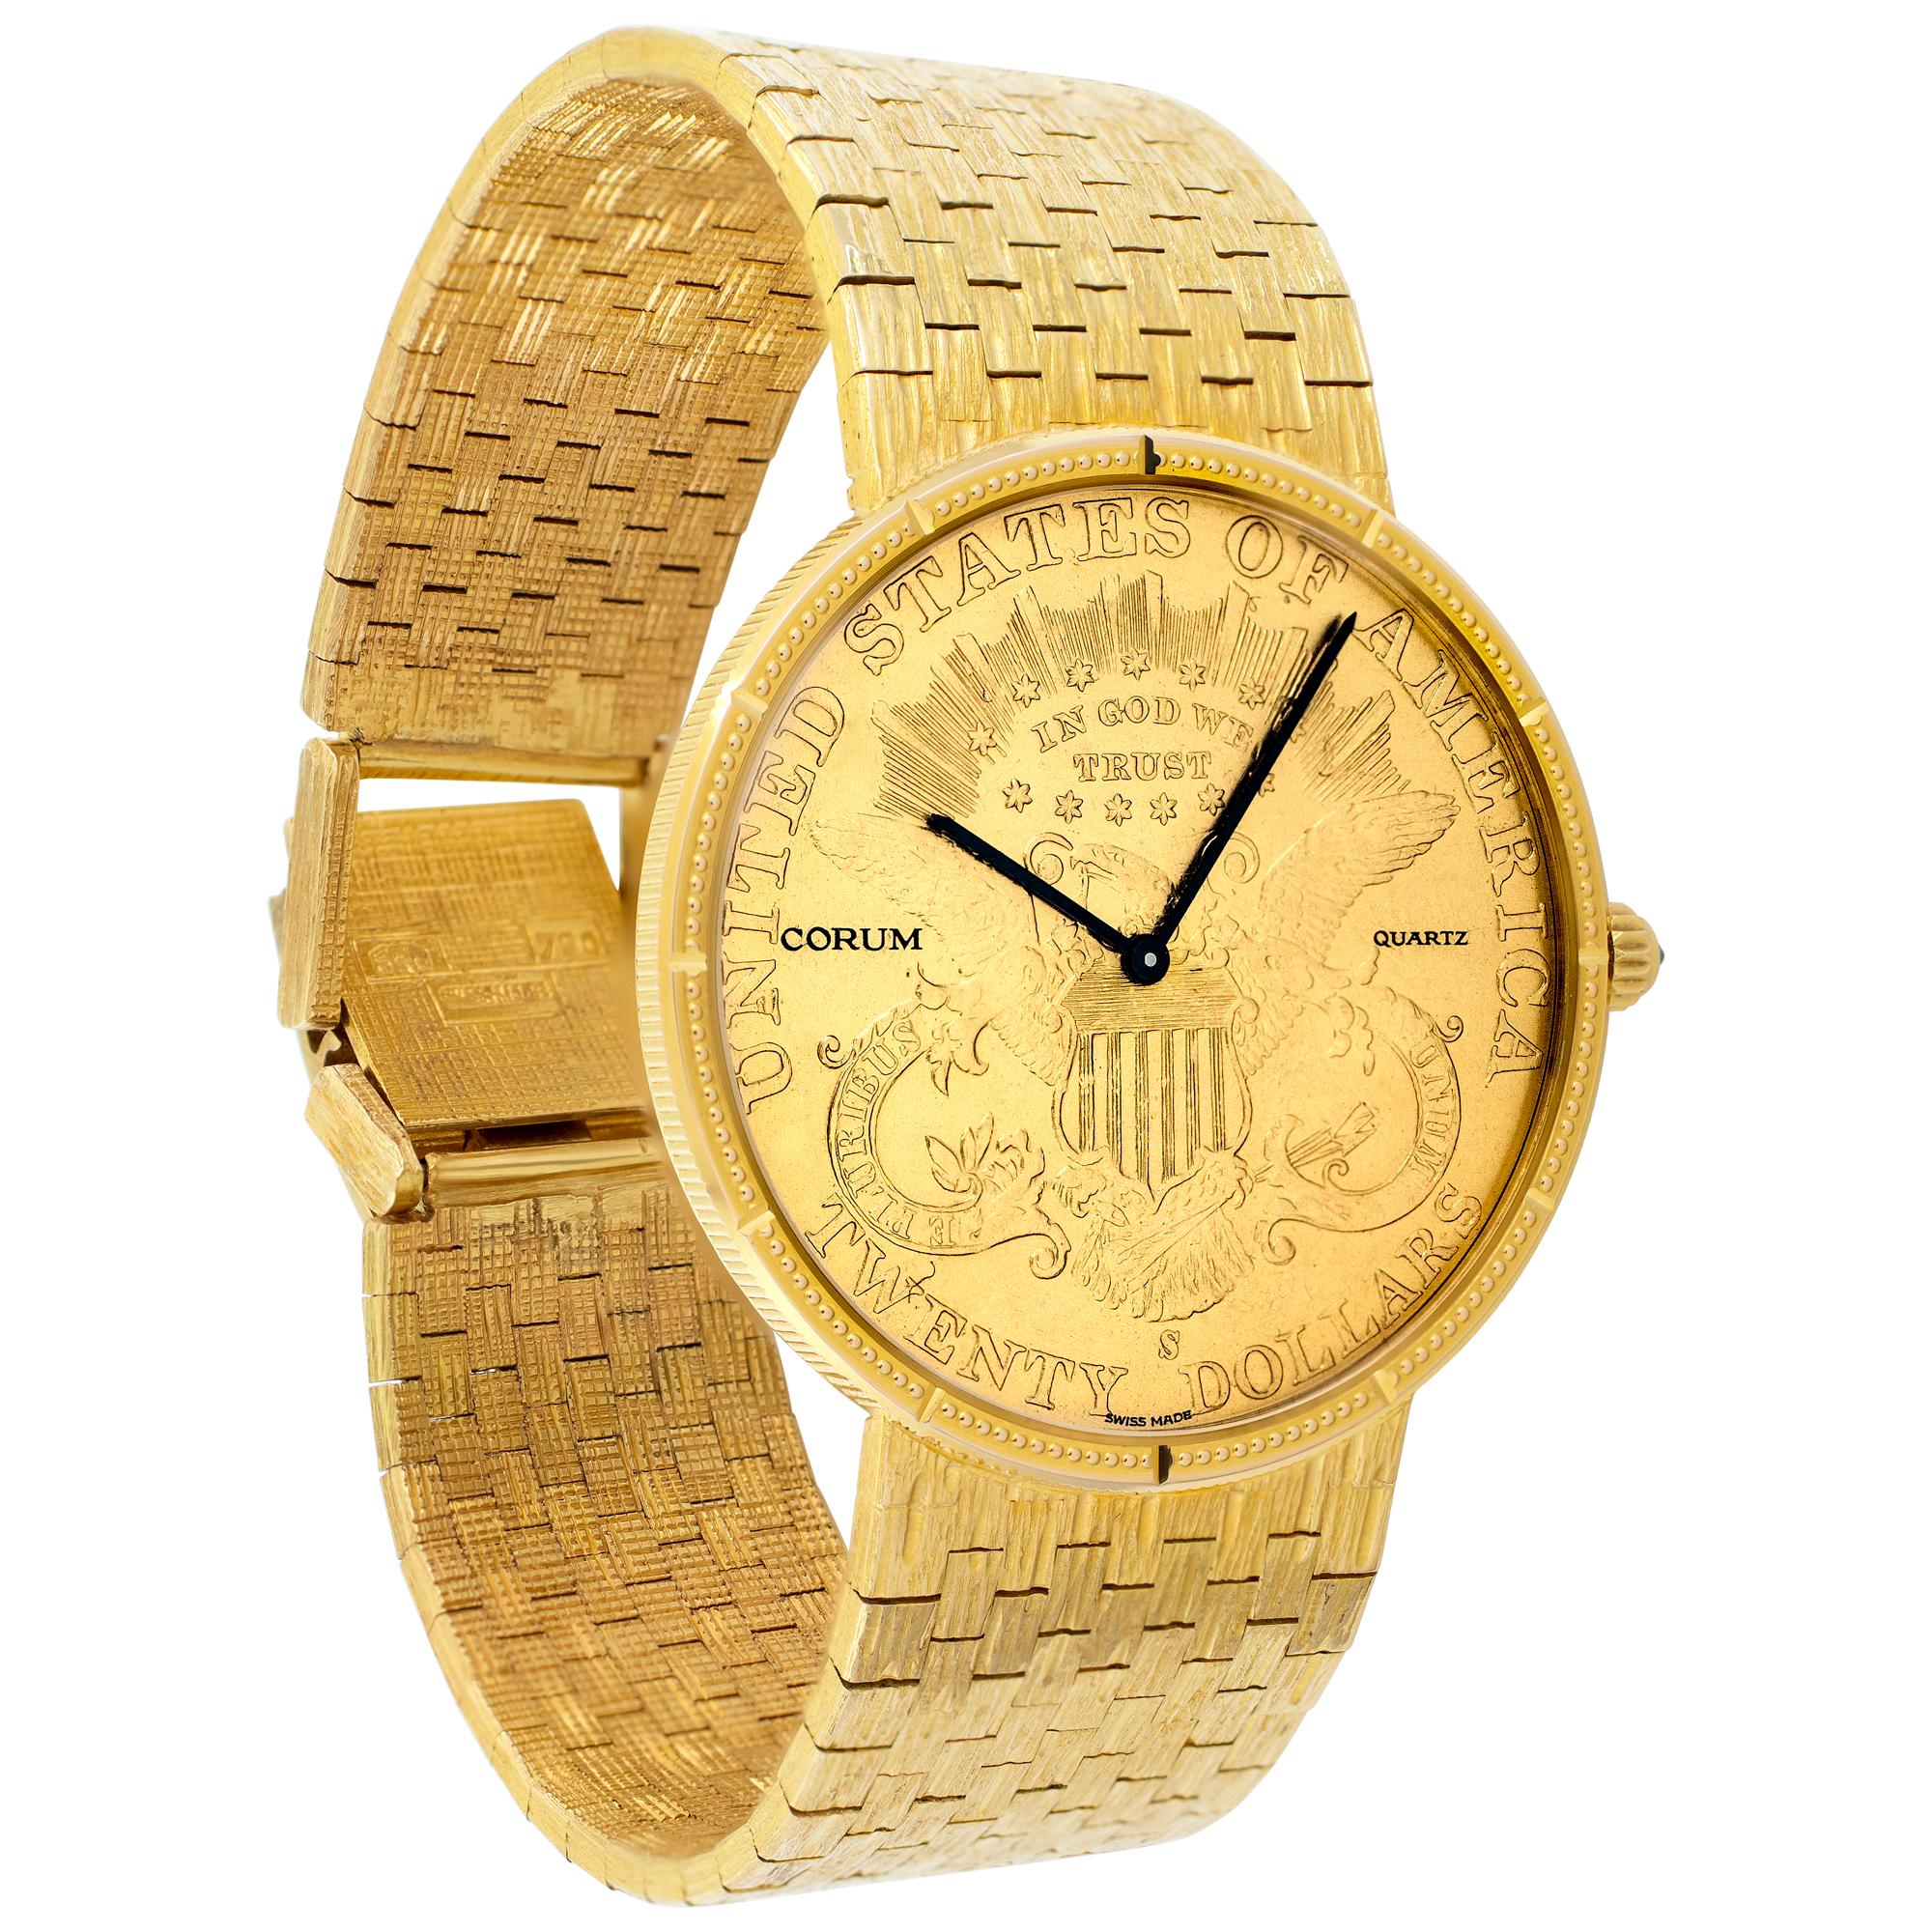 Corum $20 gold piece 5014556 in yellow gold with a Gold dial 35mm Quartz watch In Excellent Condition For Sale In Surfside, FL